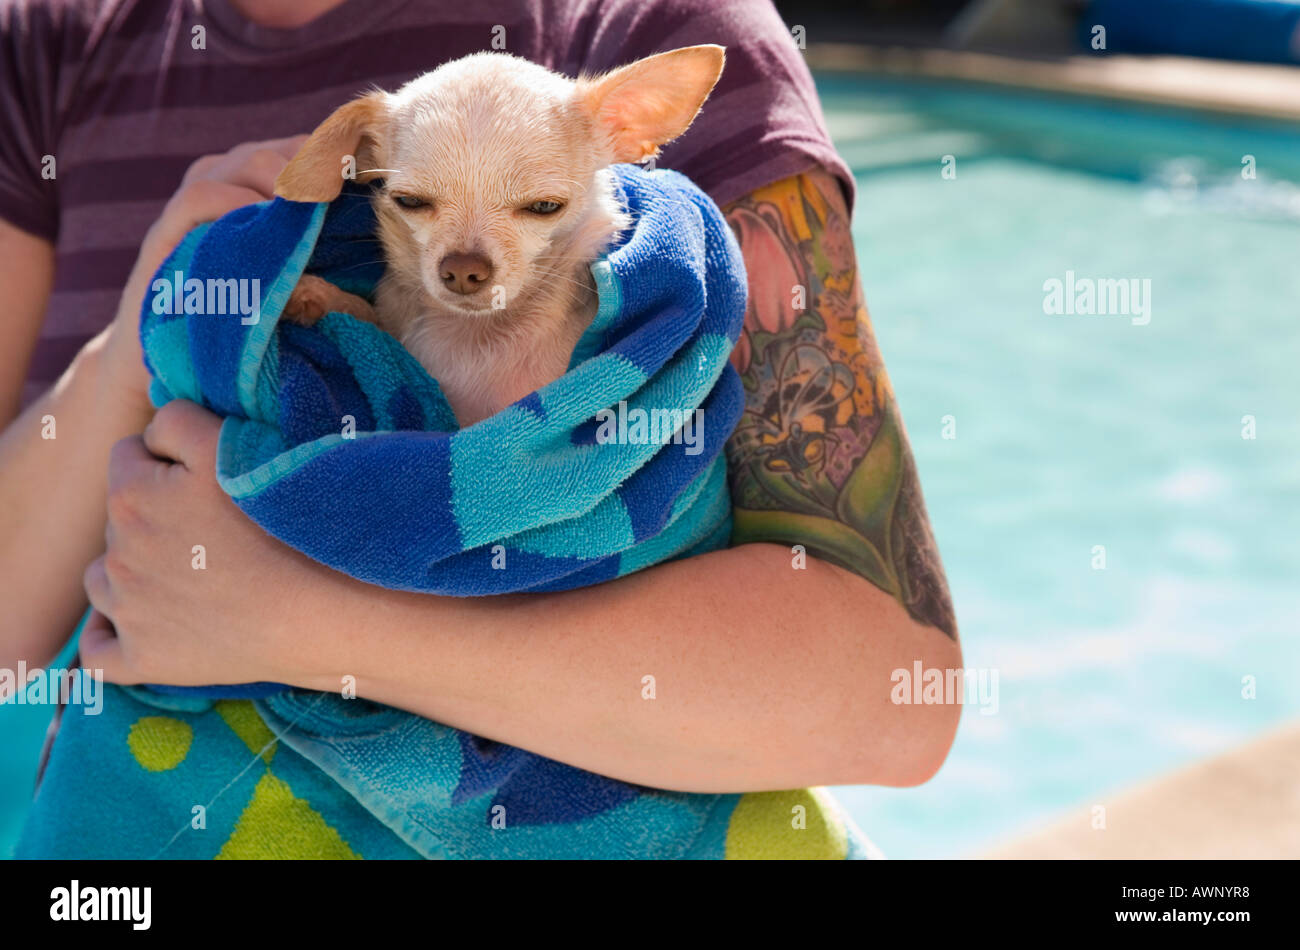 Small dog being dried off in a towel Stock Photo